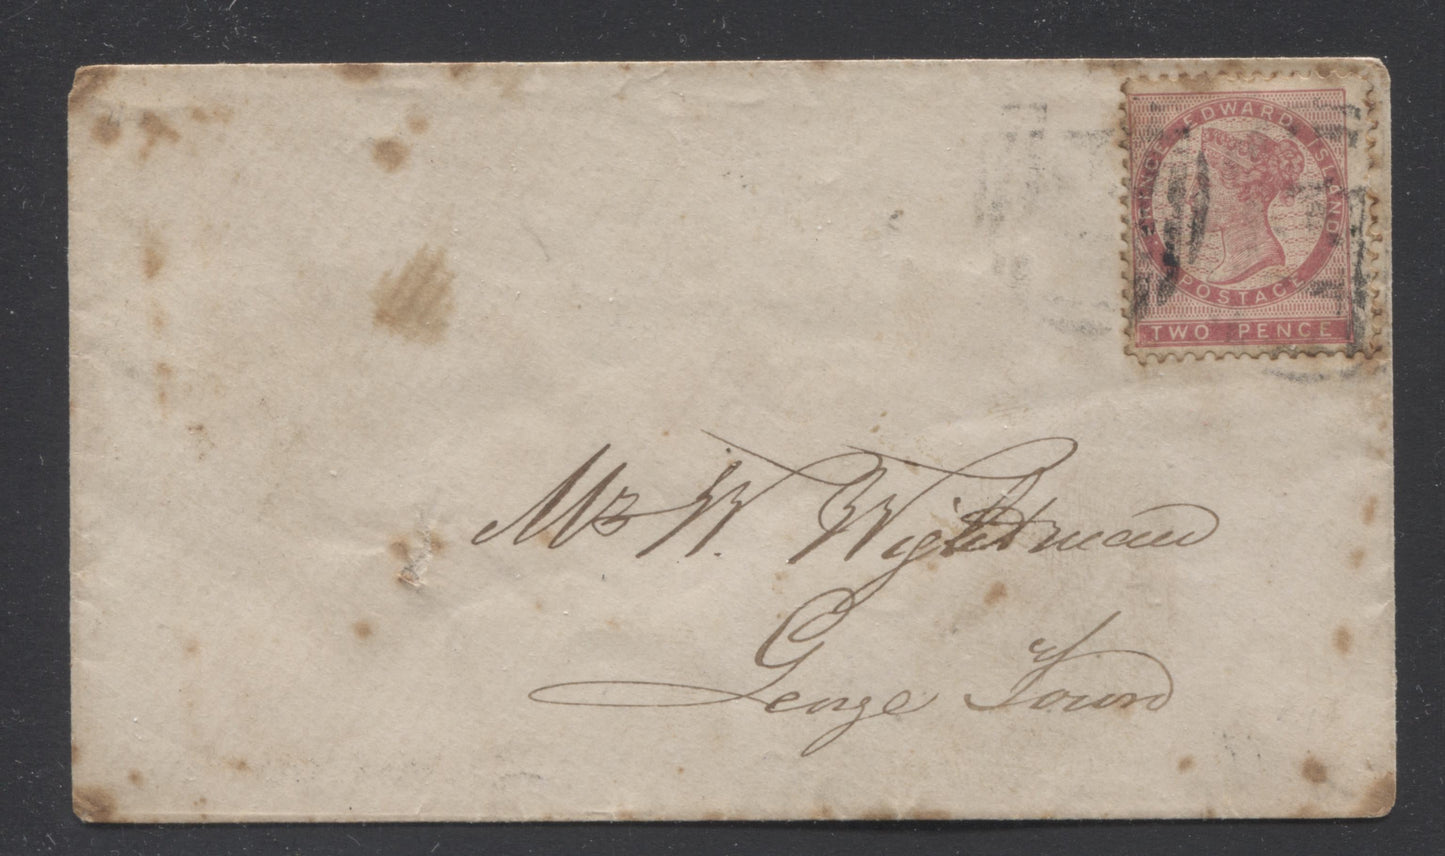 Lot 38 Prince Edward Island #5 2d Deep Rose Perf. 11.75 x 12 Die 1 Single Usage on December 4, 1866 Cover to William Wightman, Esq in Georgetown PEI, Stamp With Large Period Before "Prince"